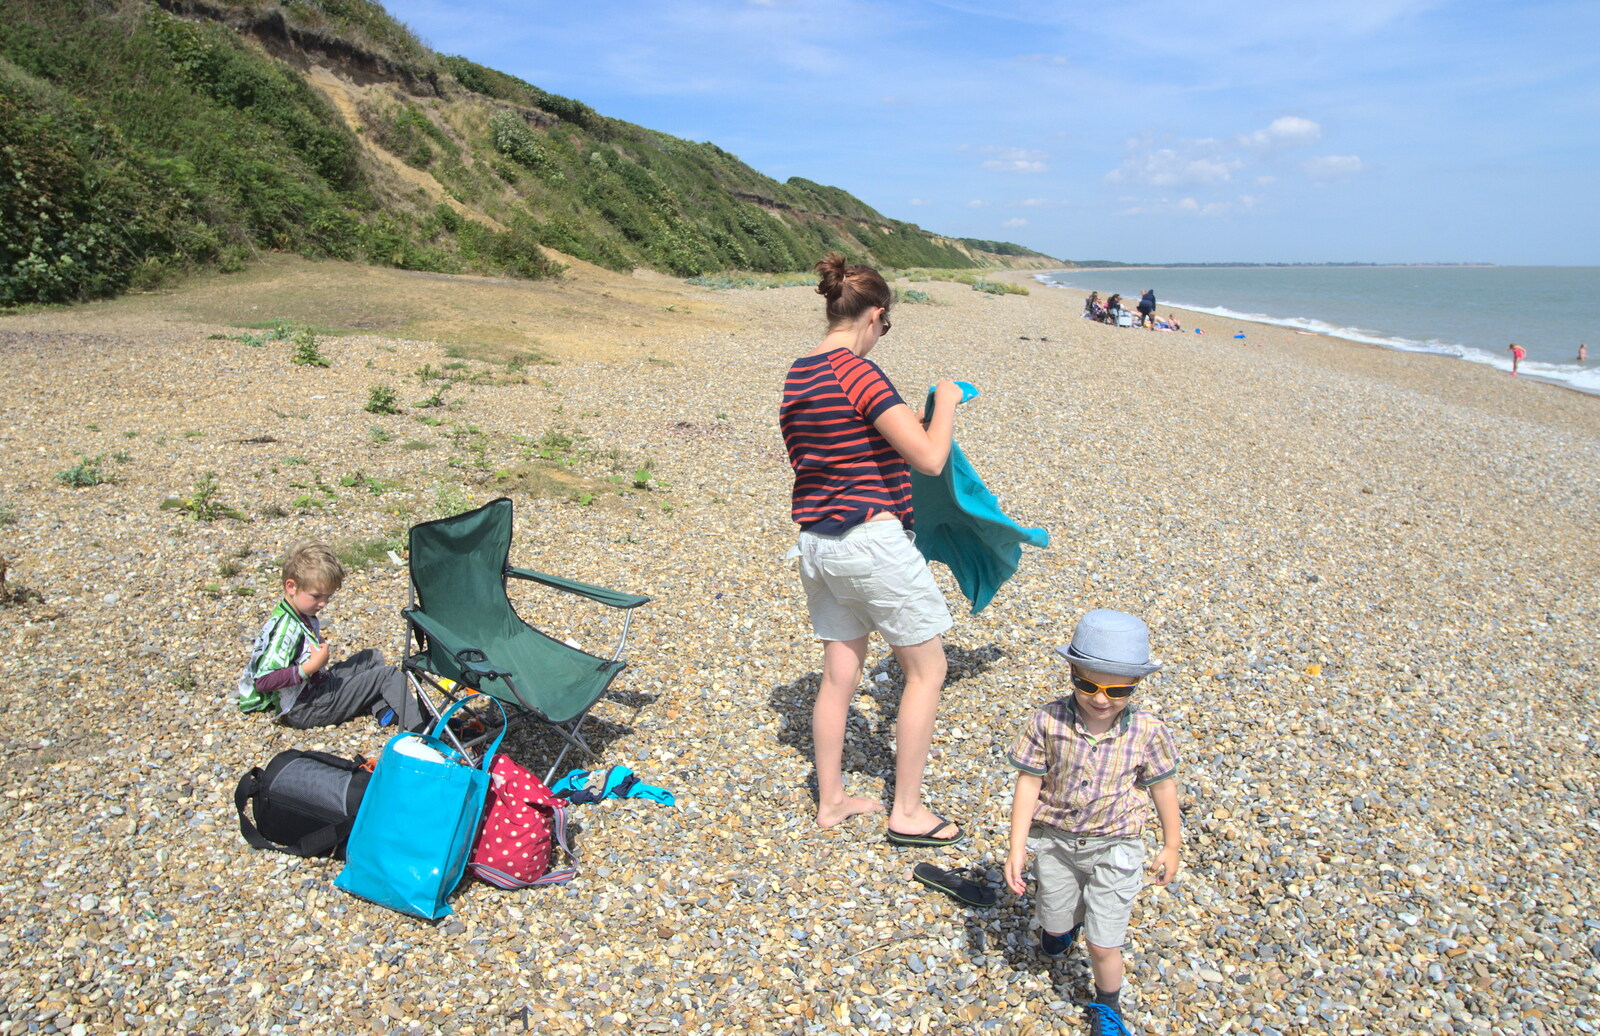 The gang on the beach from The Archaeology of Dunwich: A Camping Trip, Dunwich, Suffolk - 1st August 2015